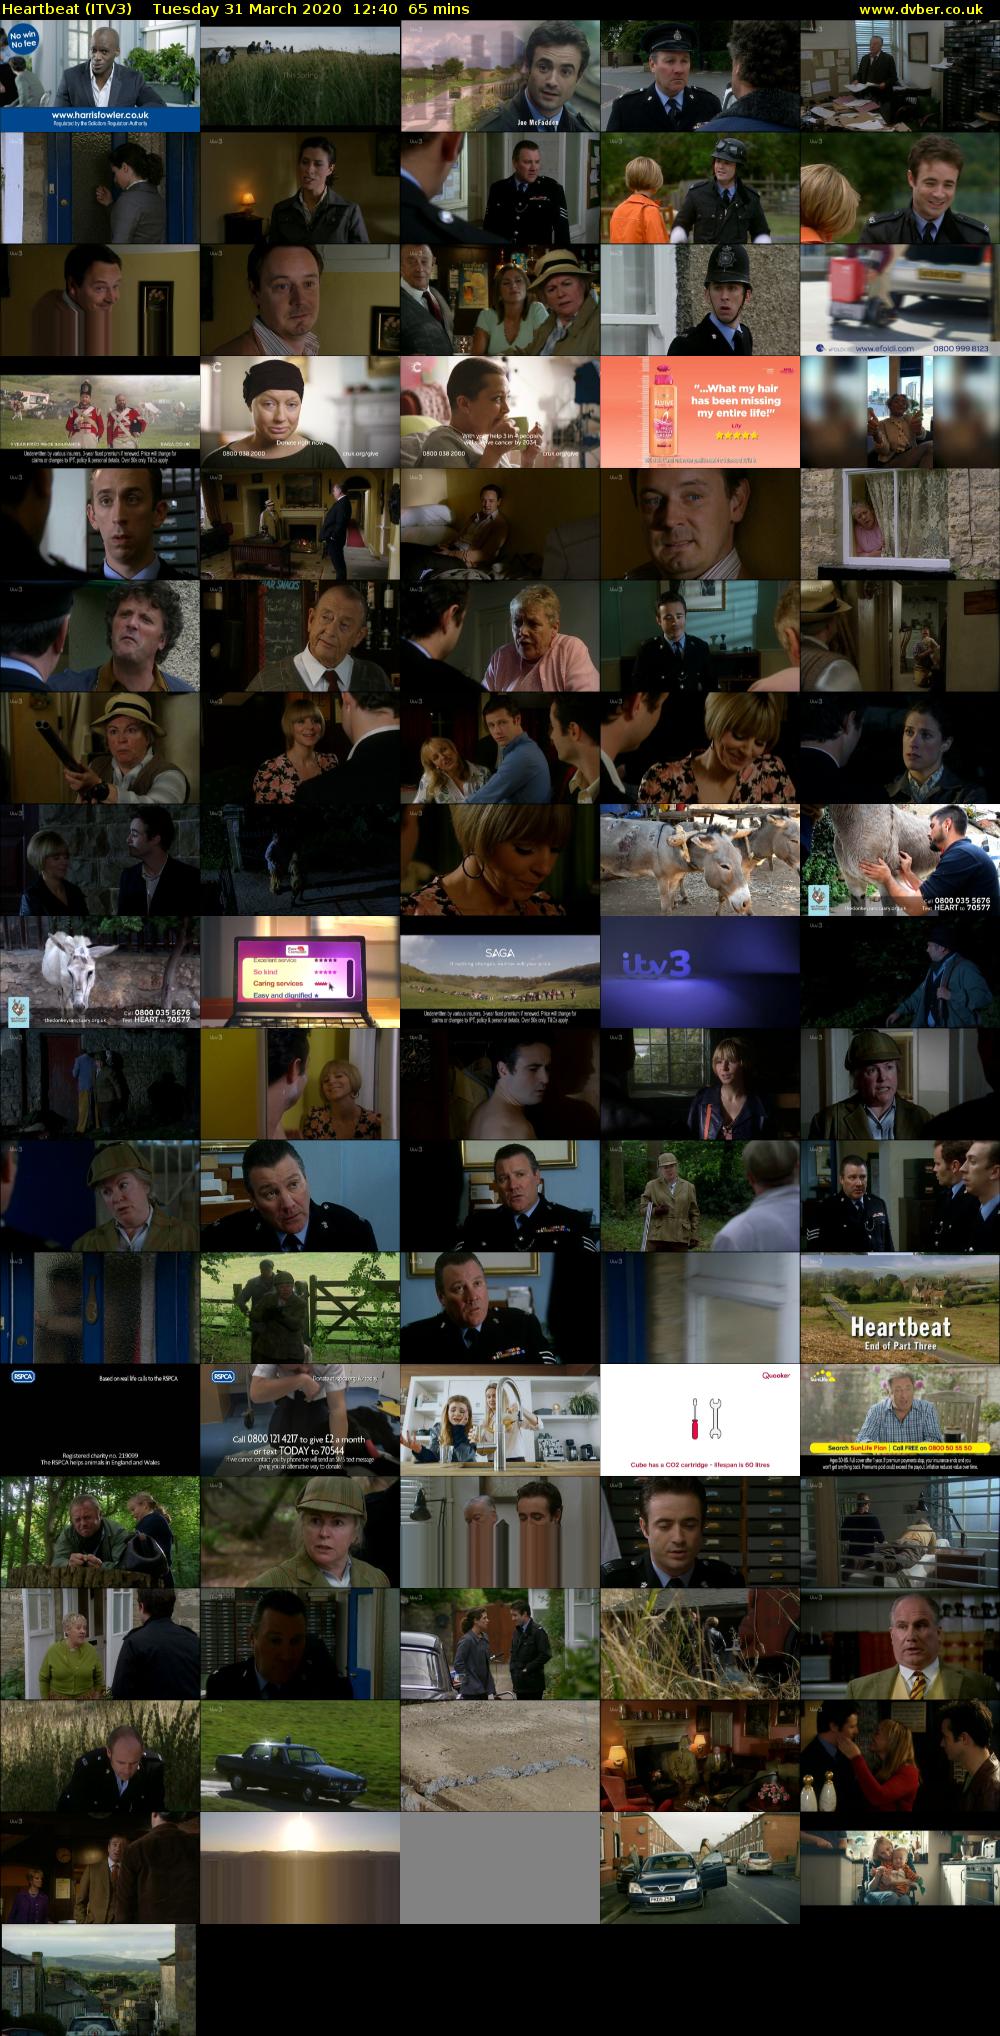 Heartbeat (ITV3) Tuesday 31 March 2020 12:40 - 13:45